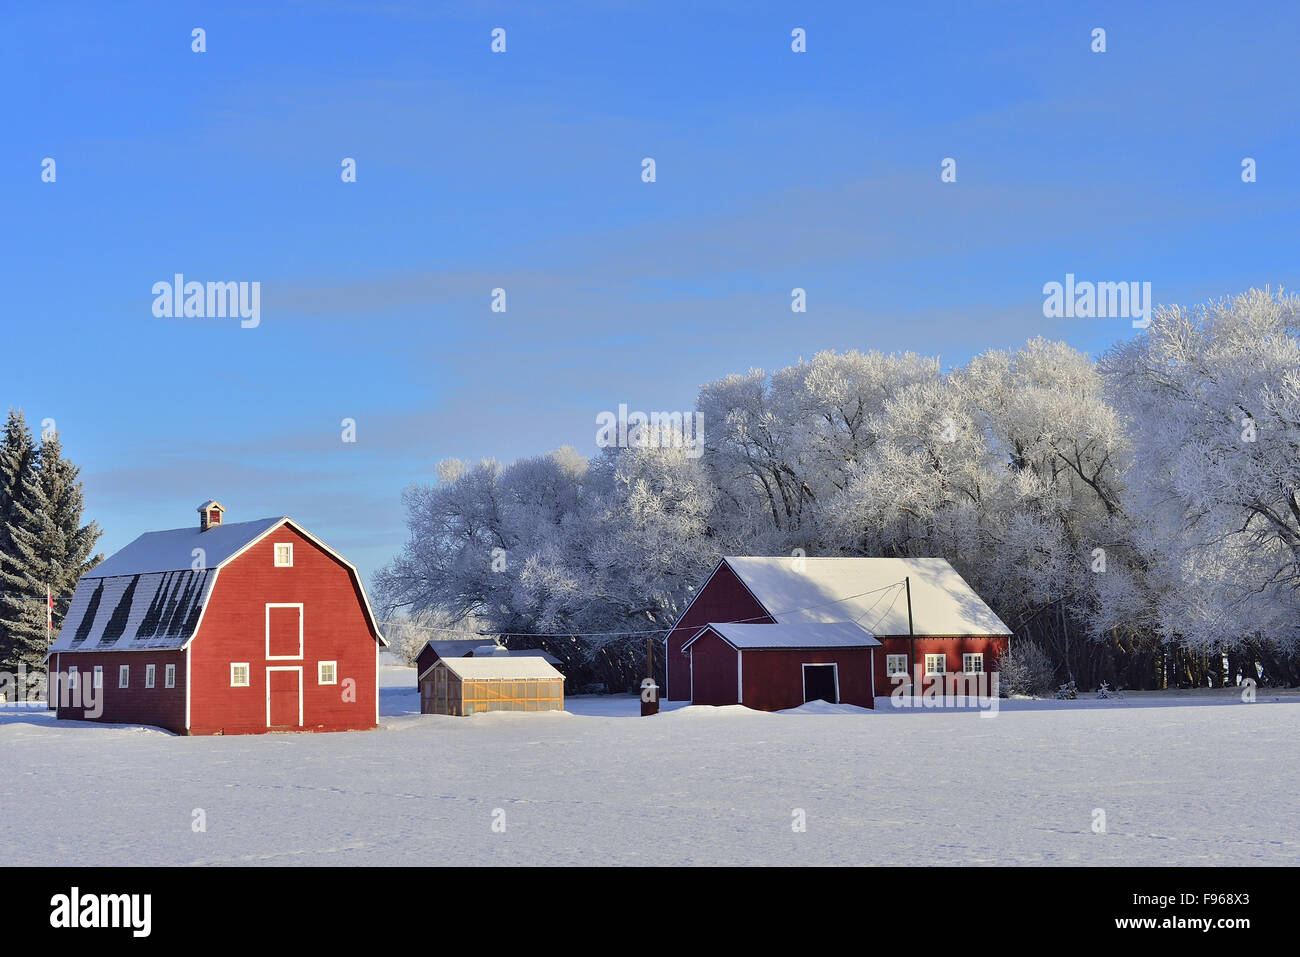 A winter landscape image  of red barn and red out buildings with a blue sky and white frost on the trees on a farm in rural Stock Photo